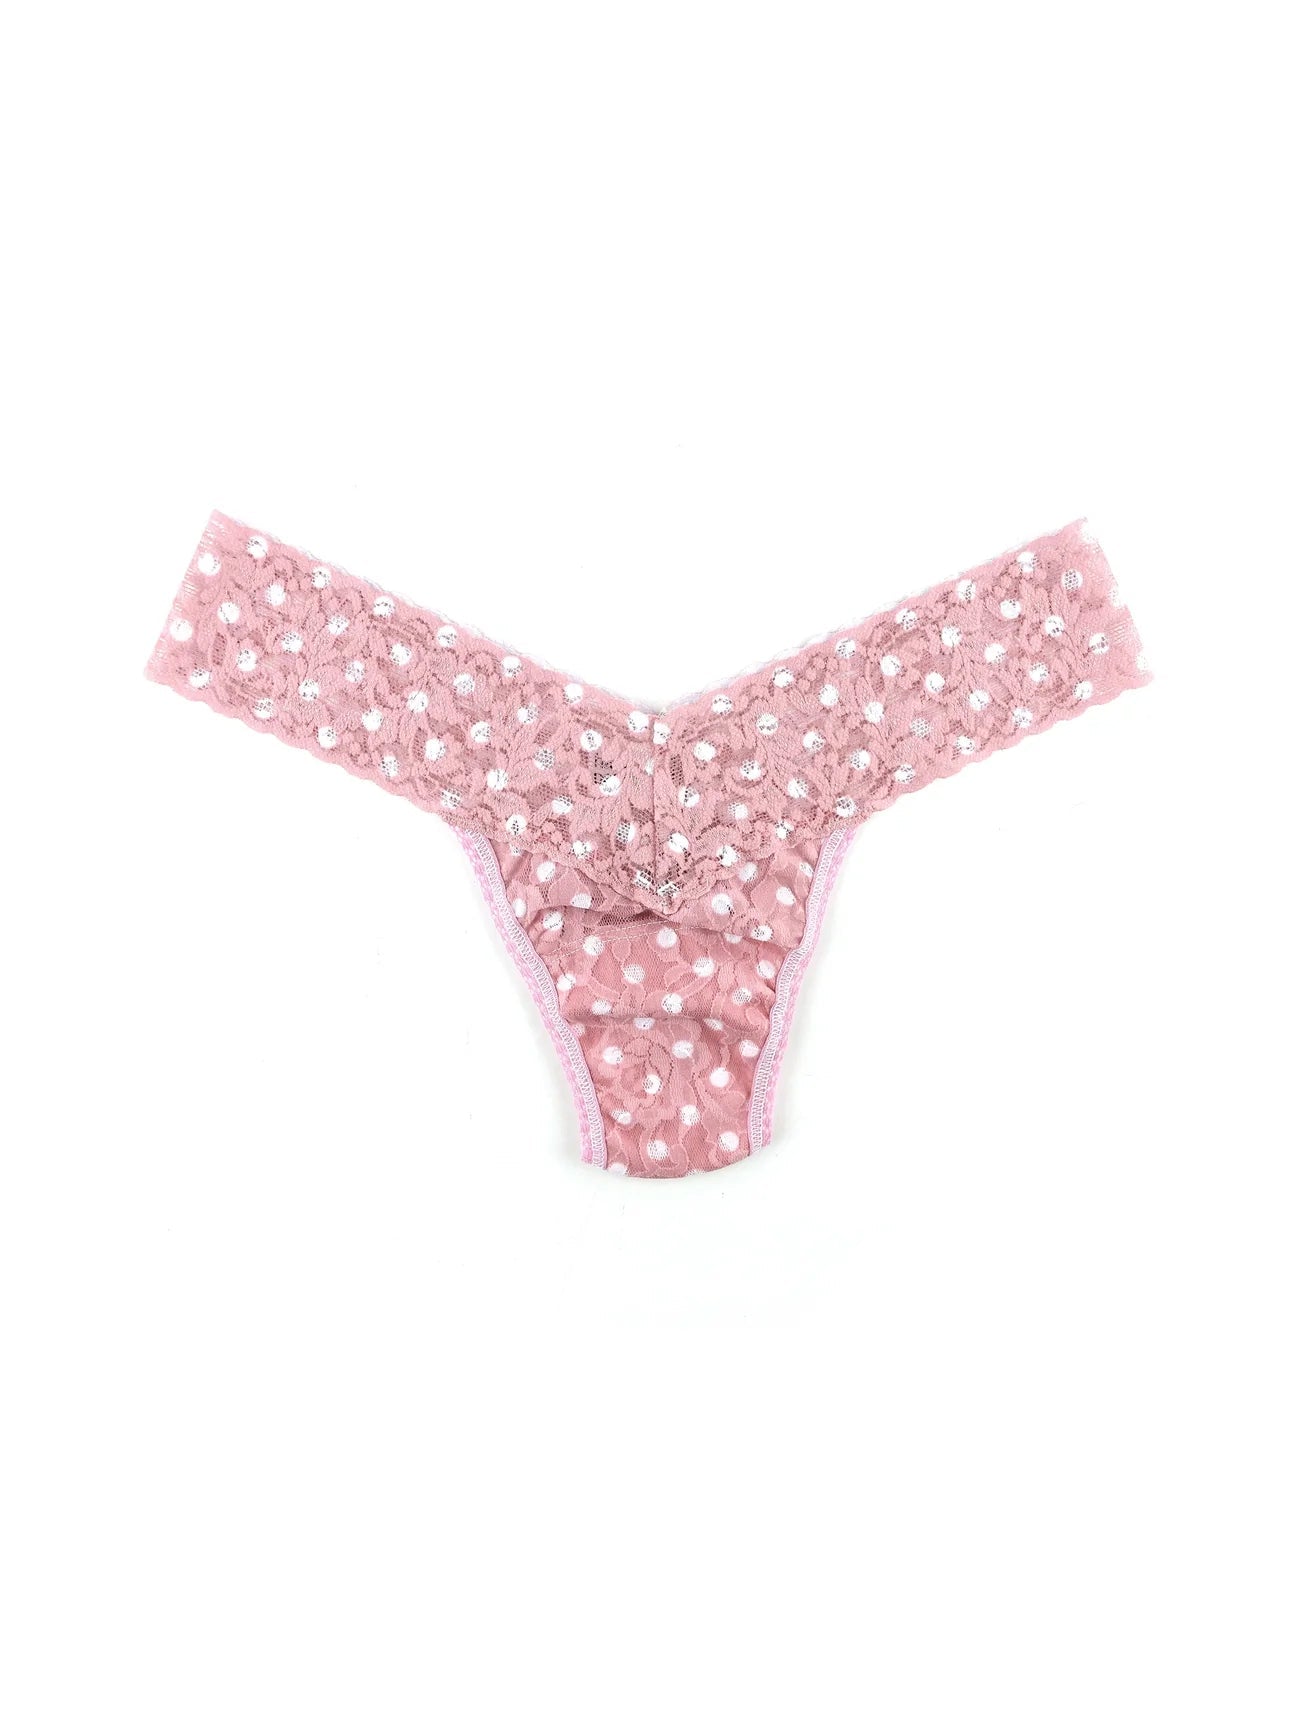 Hanky Panky Pink Frosting Thong - My Filosophy